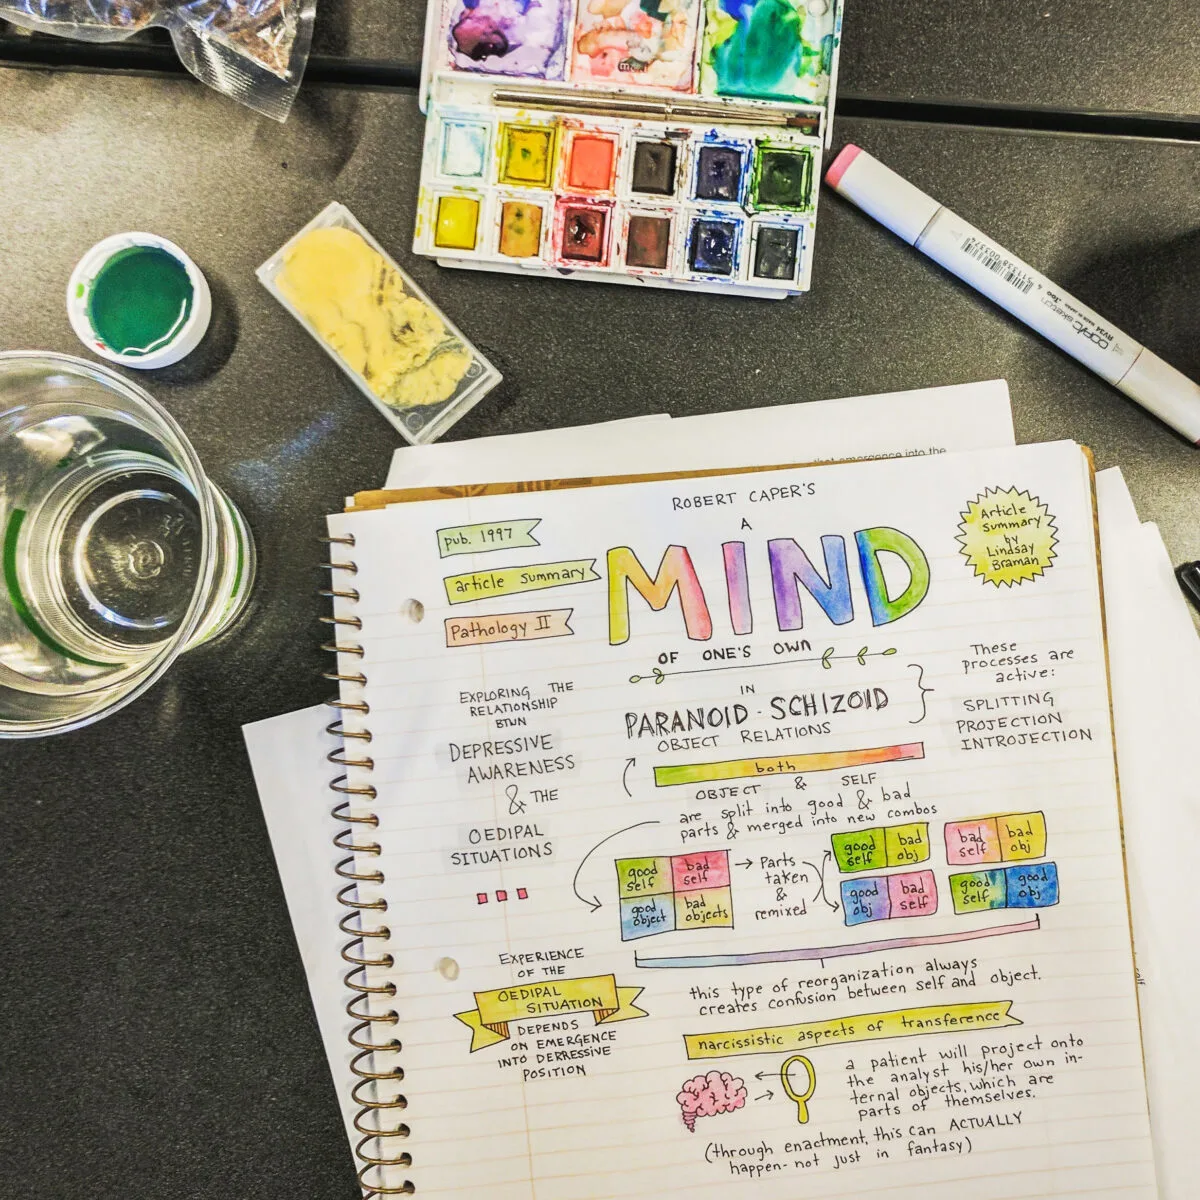 Psychology course notes created with artful drawings shown in a pretty flat lay photograph.